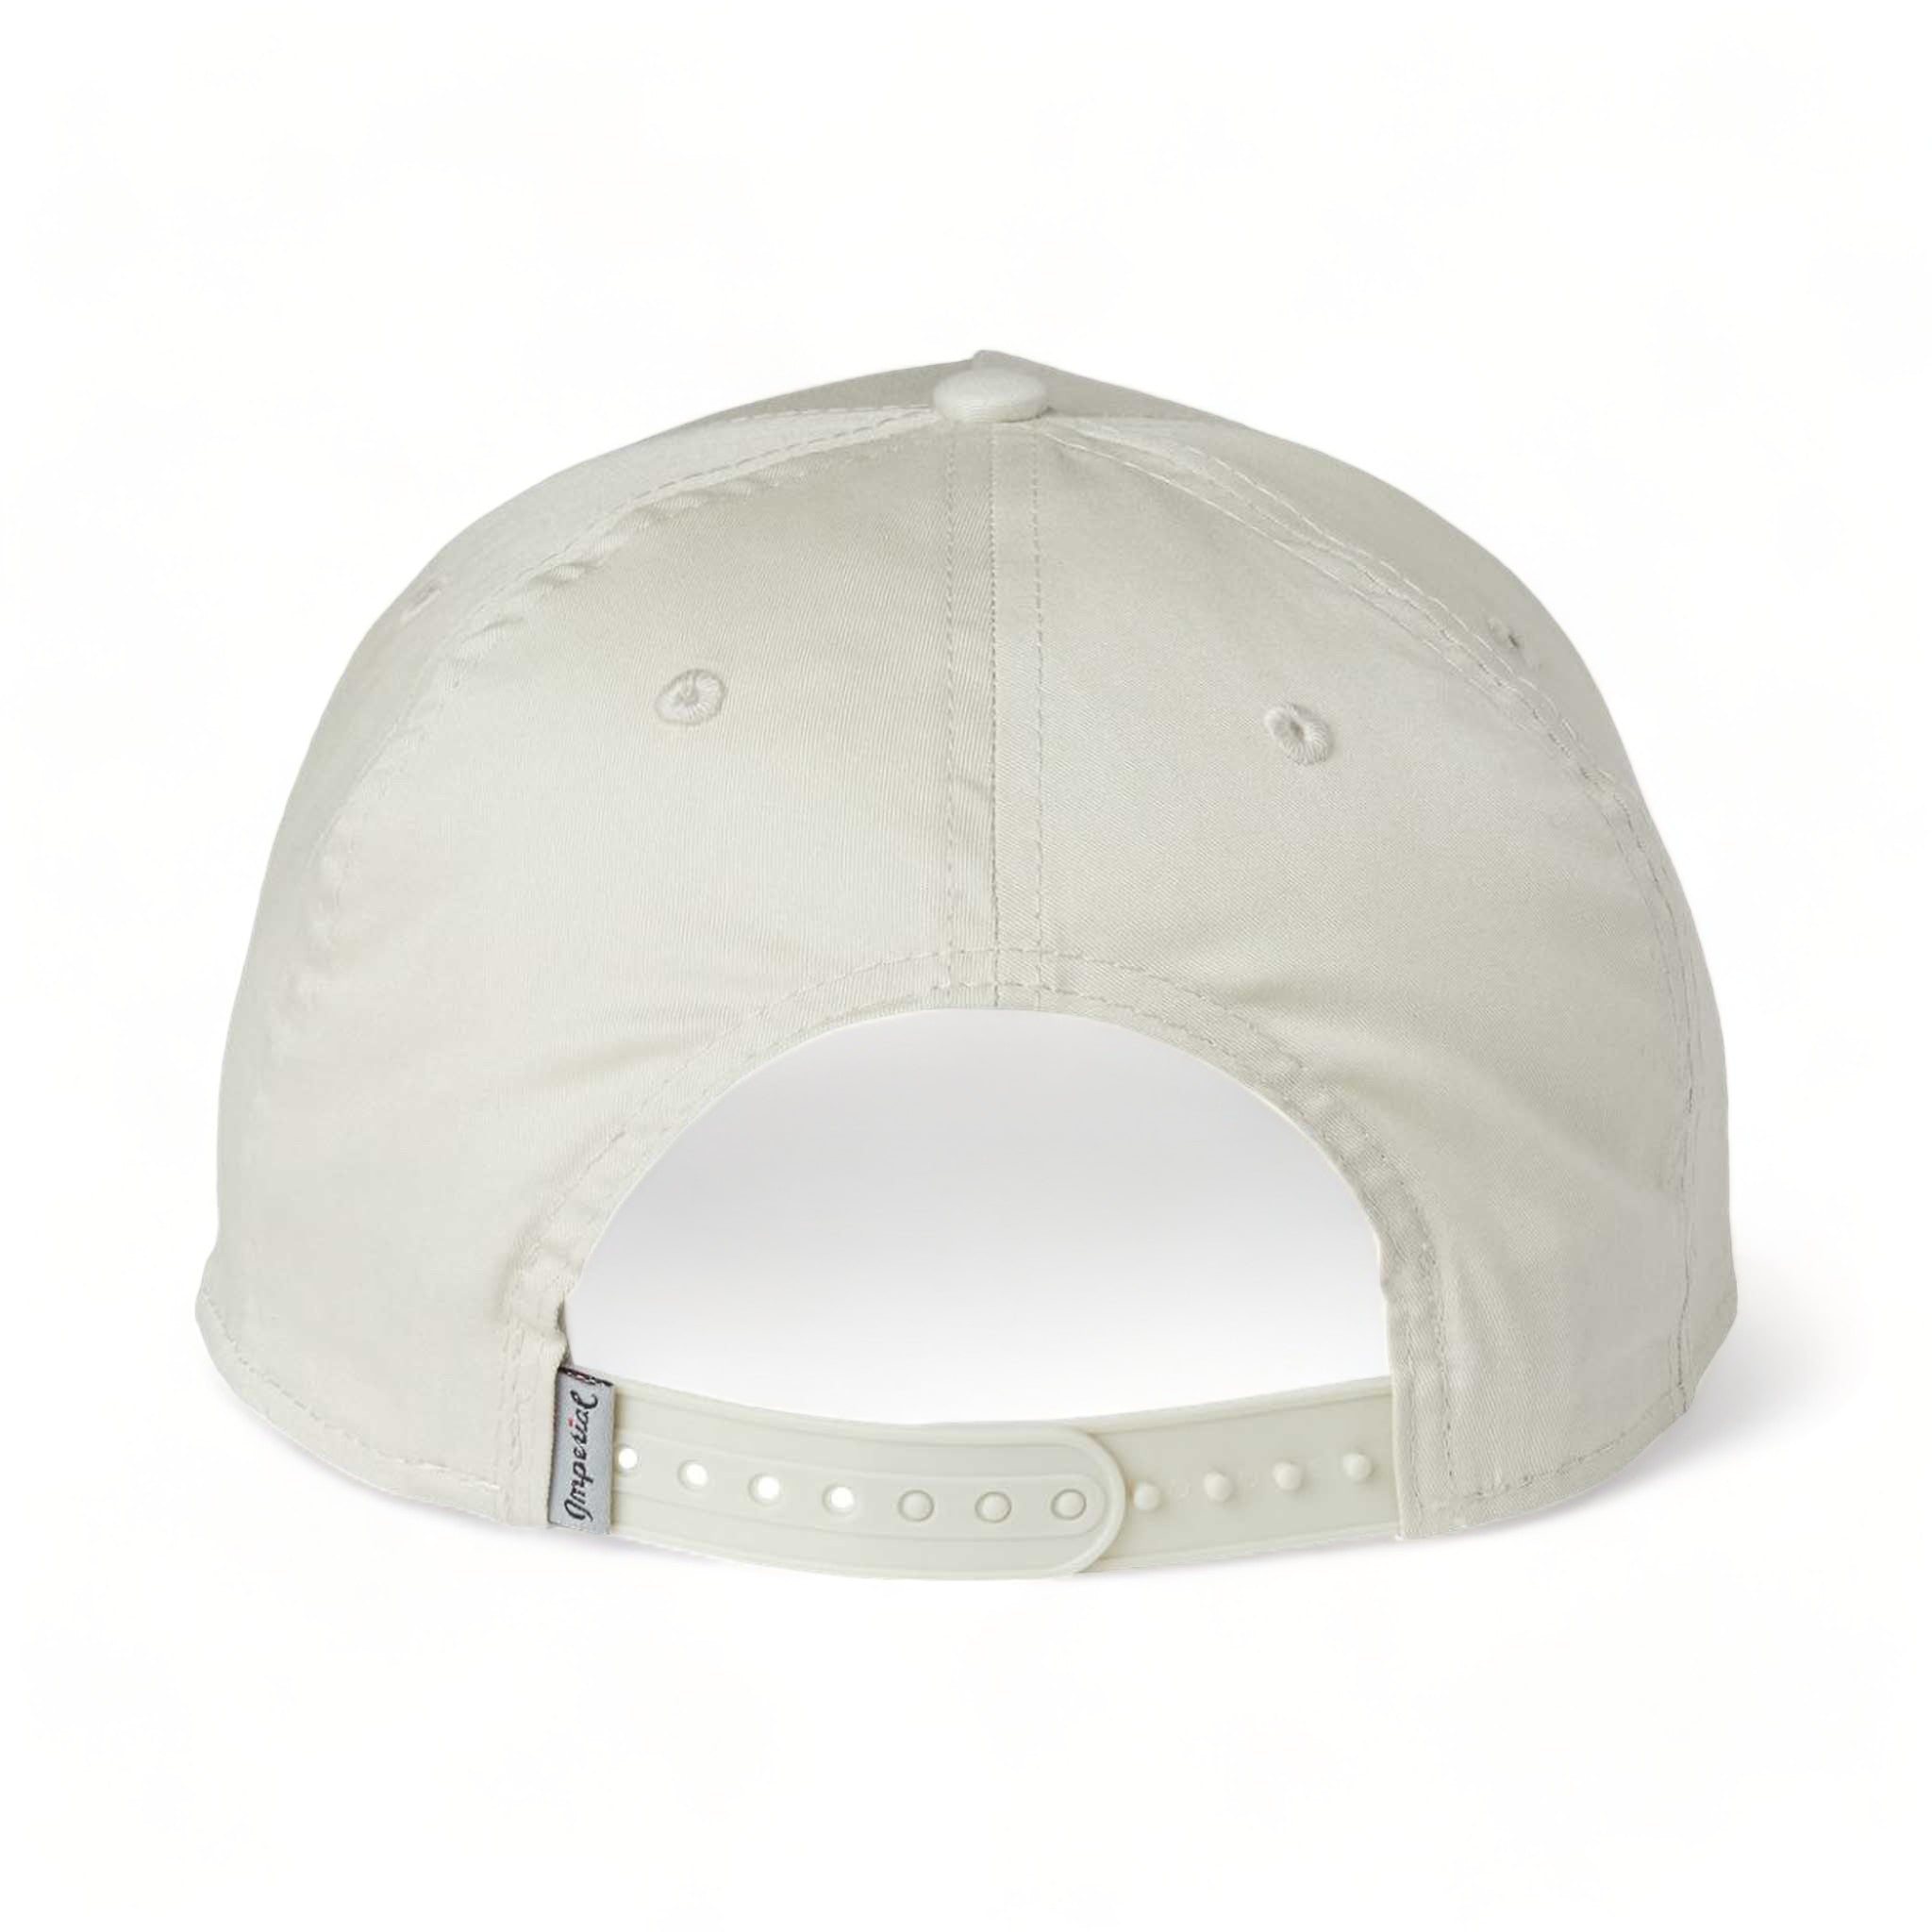 Back view of Imperial 5056 custom hat in putty and white